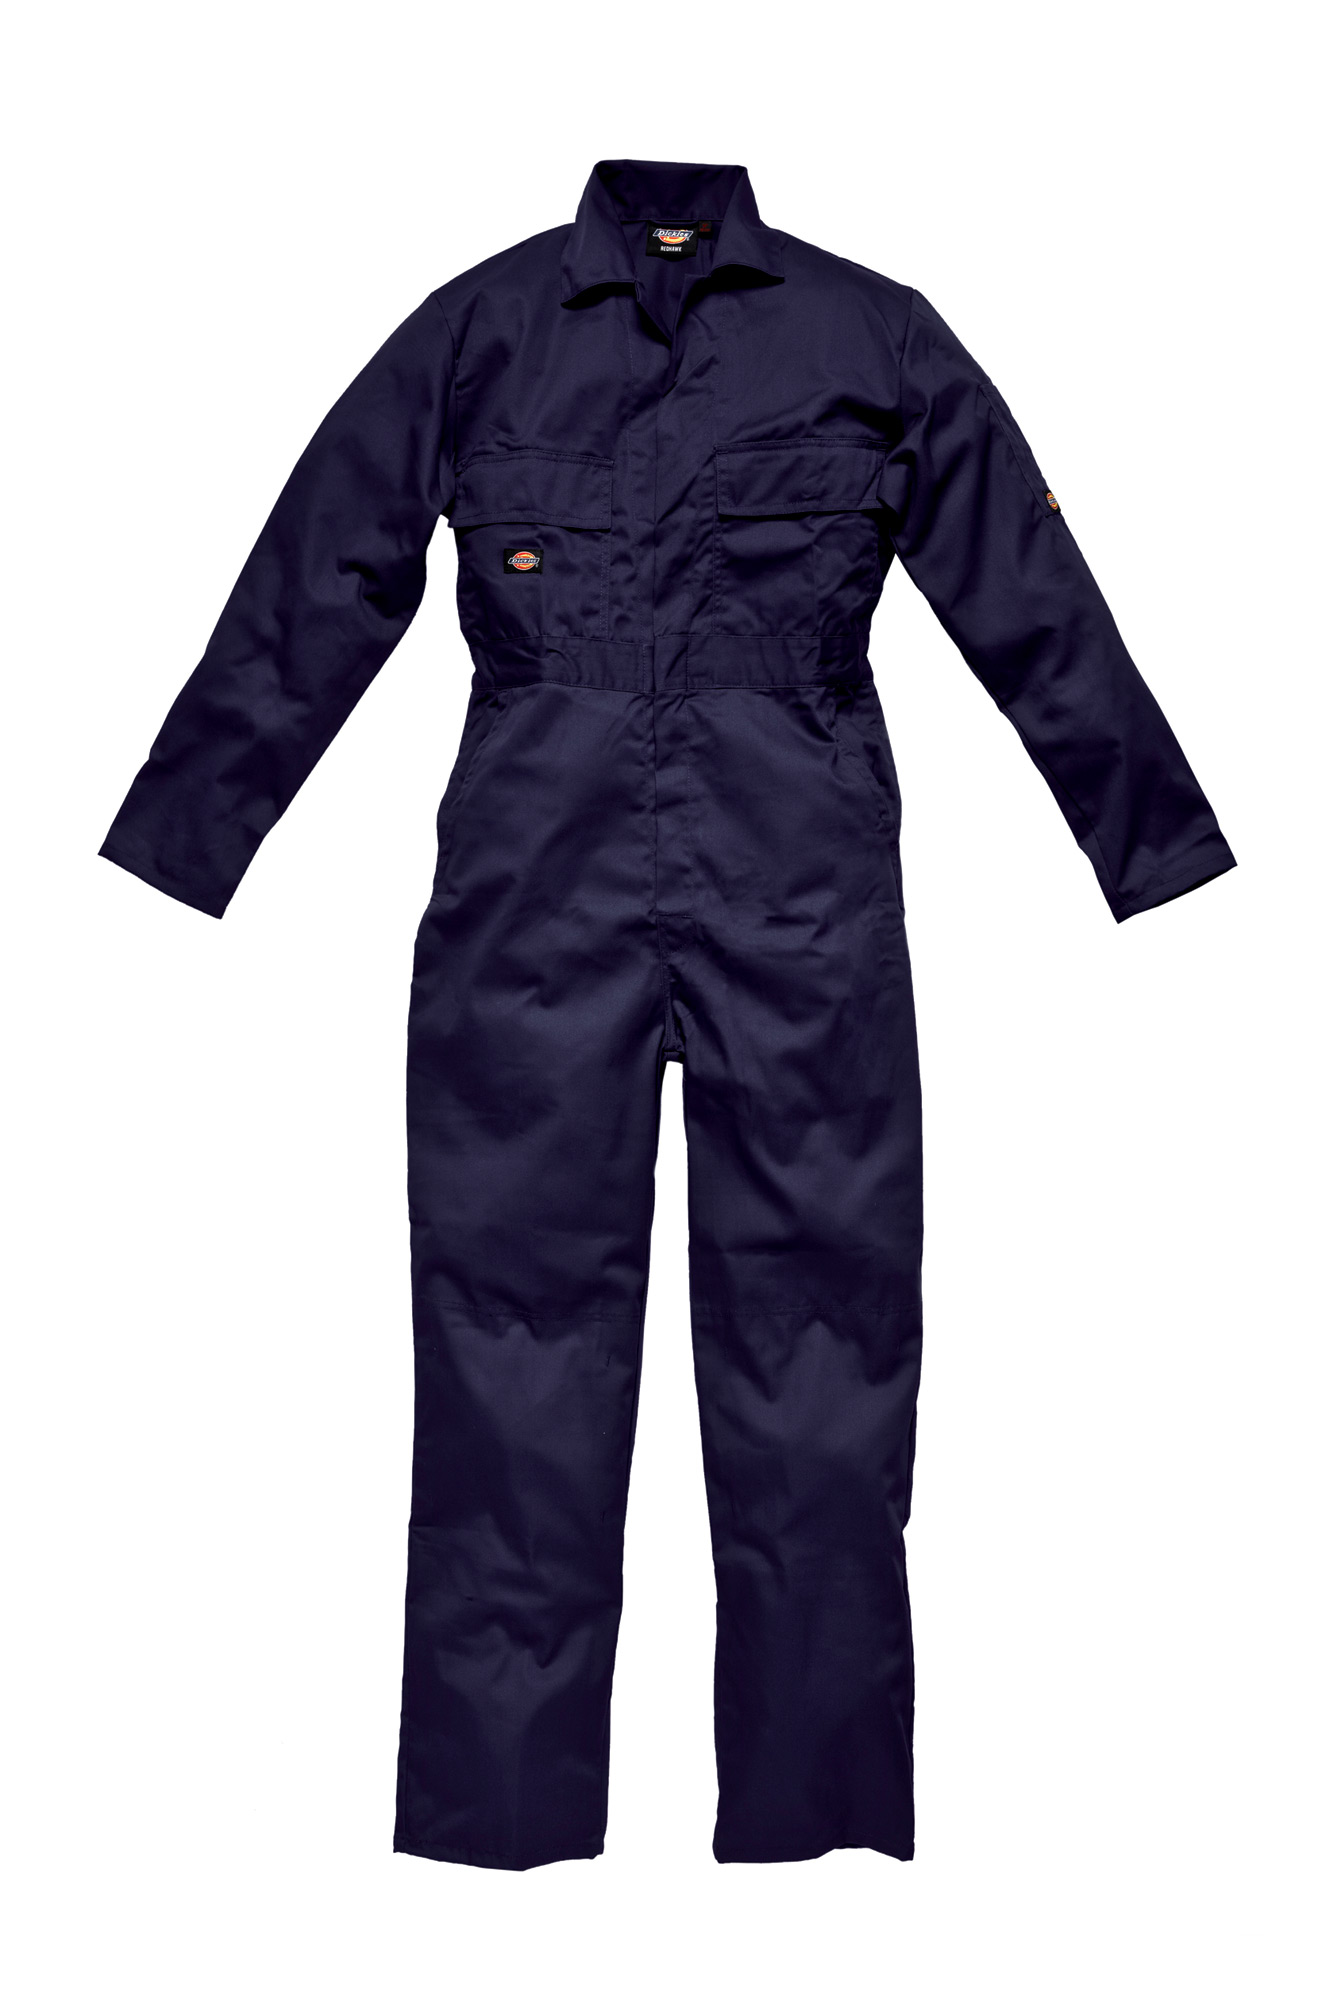 WD4829 -Redhawk Stud Front Coverall